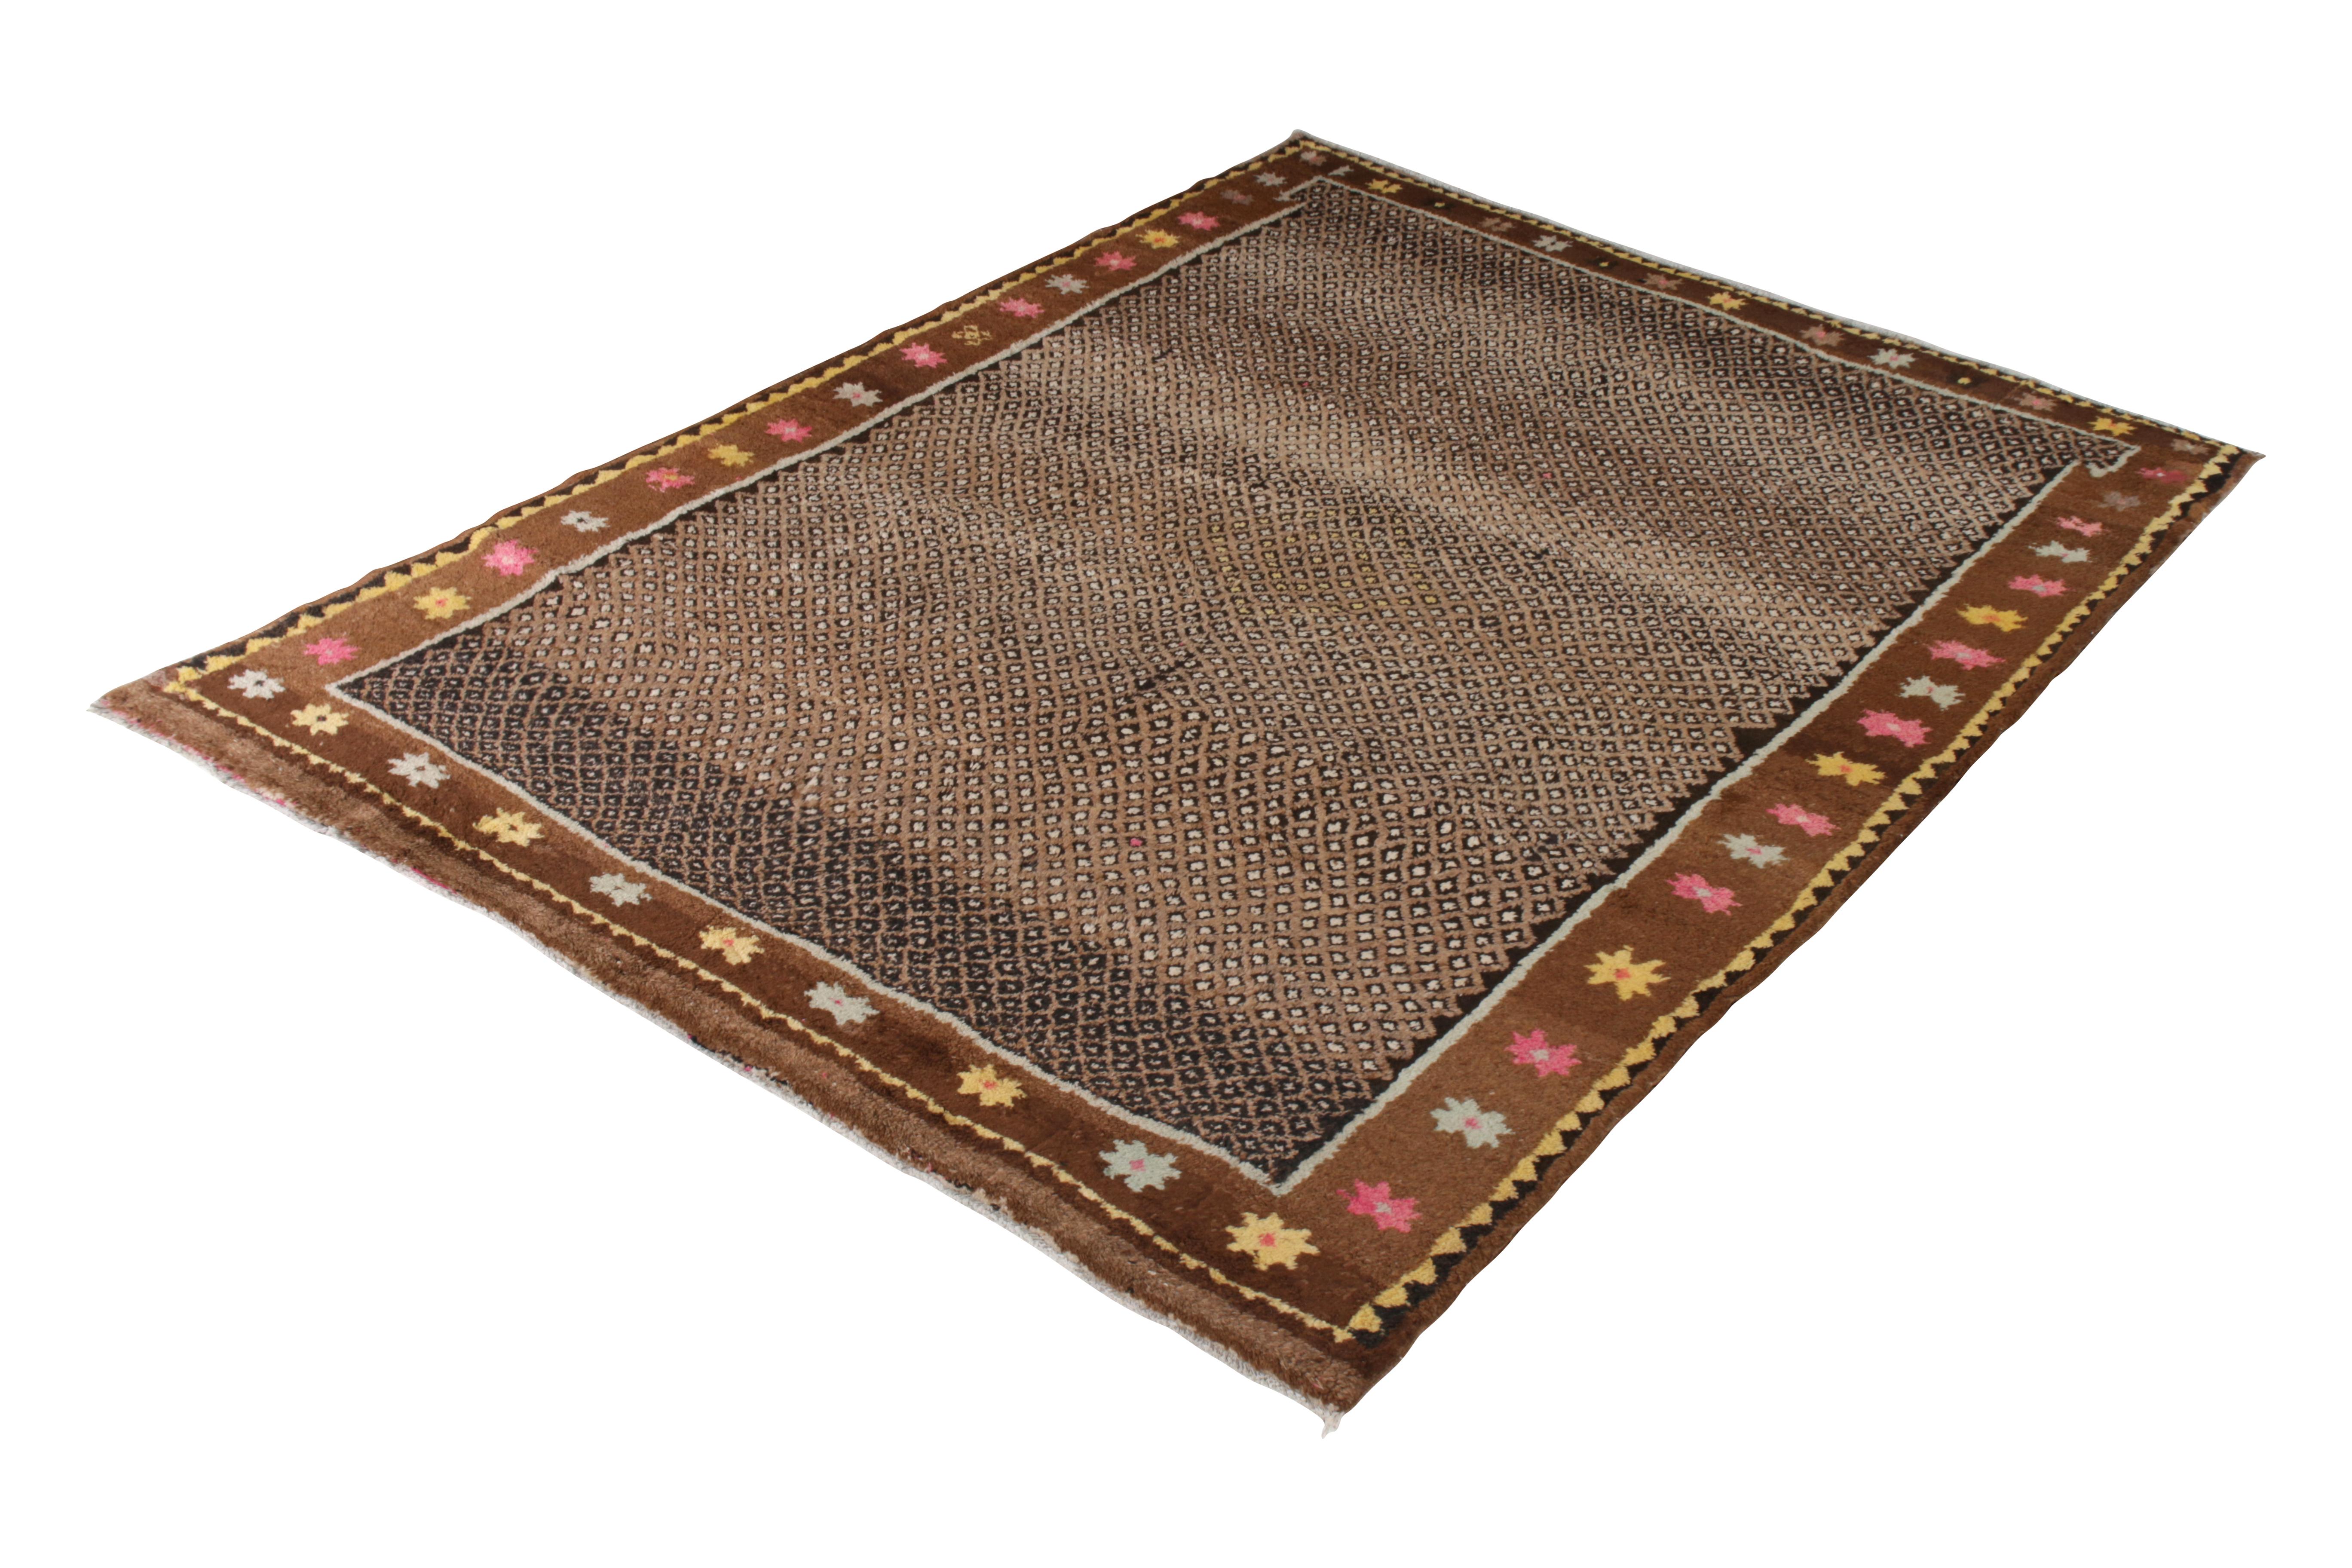 Hand knotted in a lush wool pile originating from Turkey, circa 1950-1950, this 9 x 11 vintage rug of midcentury Turkish origin enjoys rich play of beige-brown with whimsical accents in the star motifs meandering through the border. These elements